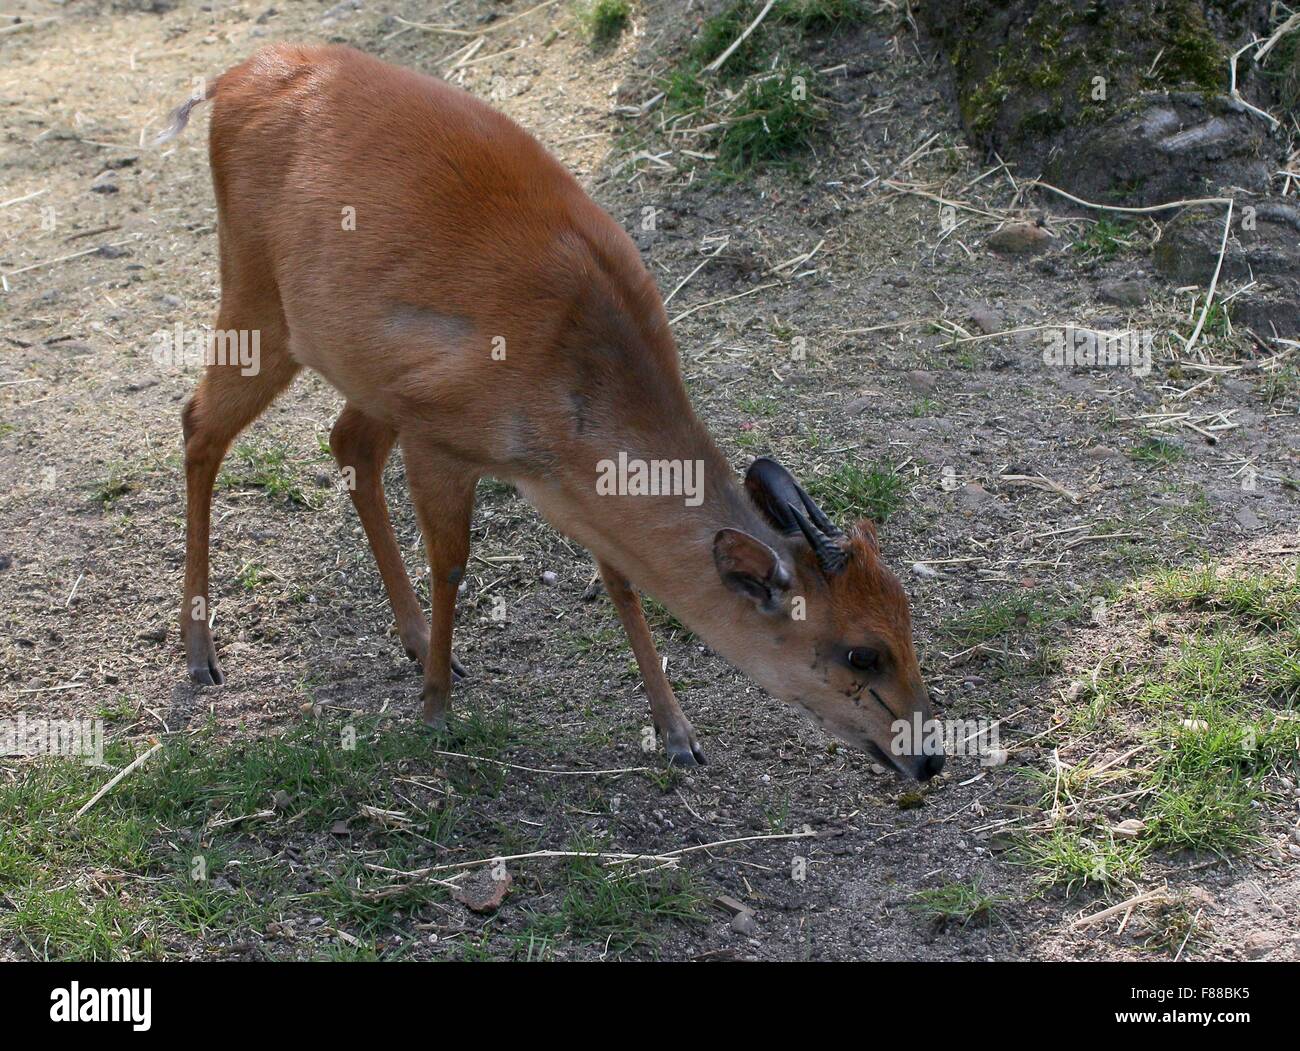 Grazing Red forest duiker or Natal duiker antelope (Cephalophus natalensis), native to Southern and Eastern Africa Stock Photo